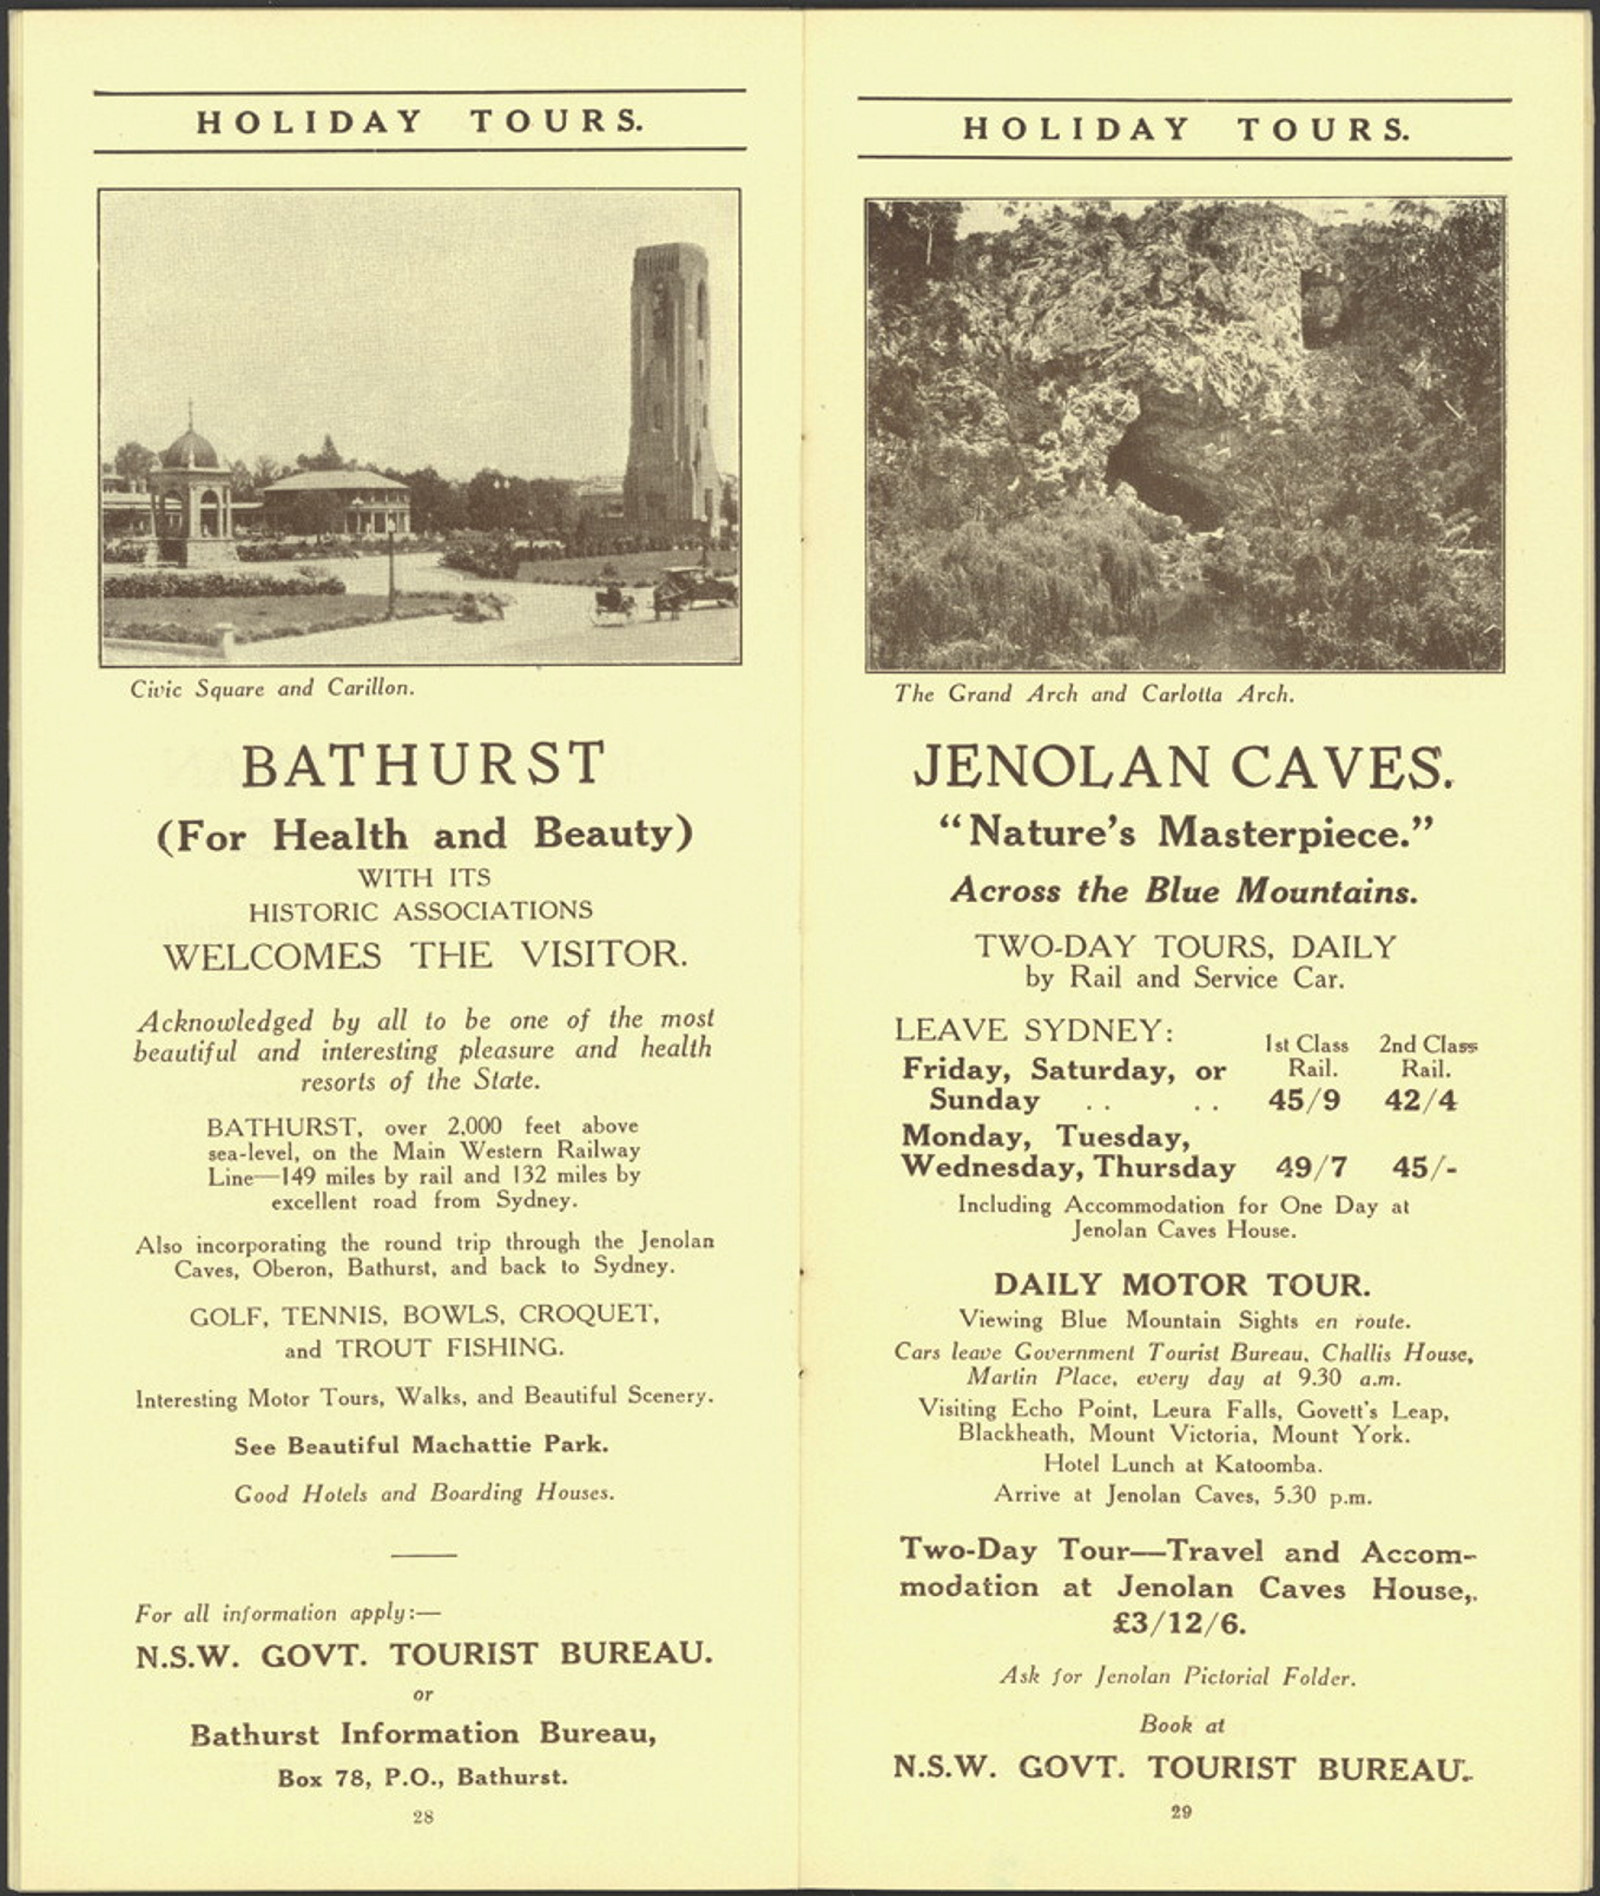 Page 28 - Bathurst, for health and beauty. Photo of Civic Square and Carillon. Page 29 - Jenolan Caves, nature's masterpiece. Photo of The Grand Arch and Carlotta Arch. Digital ID 16410_a111_11a_000022_p28-29